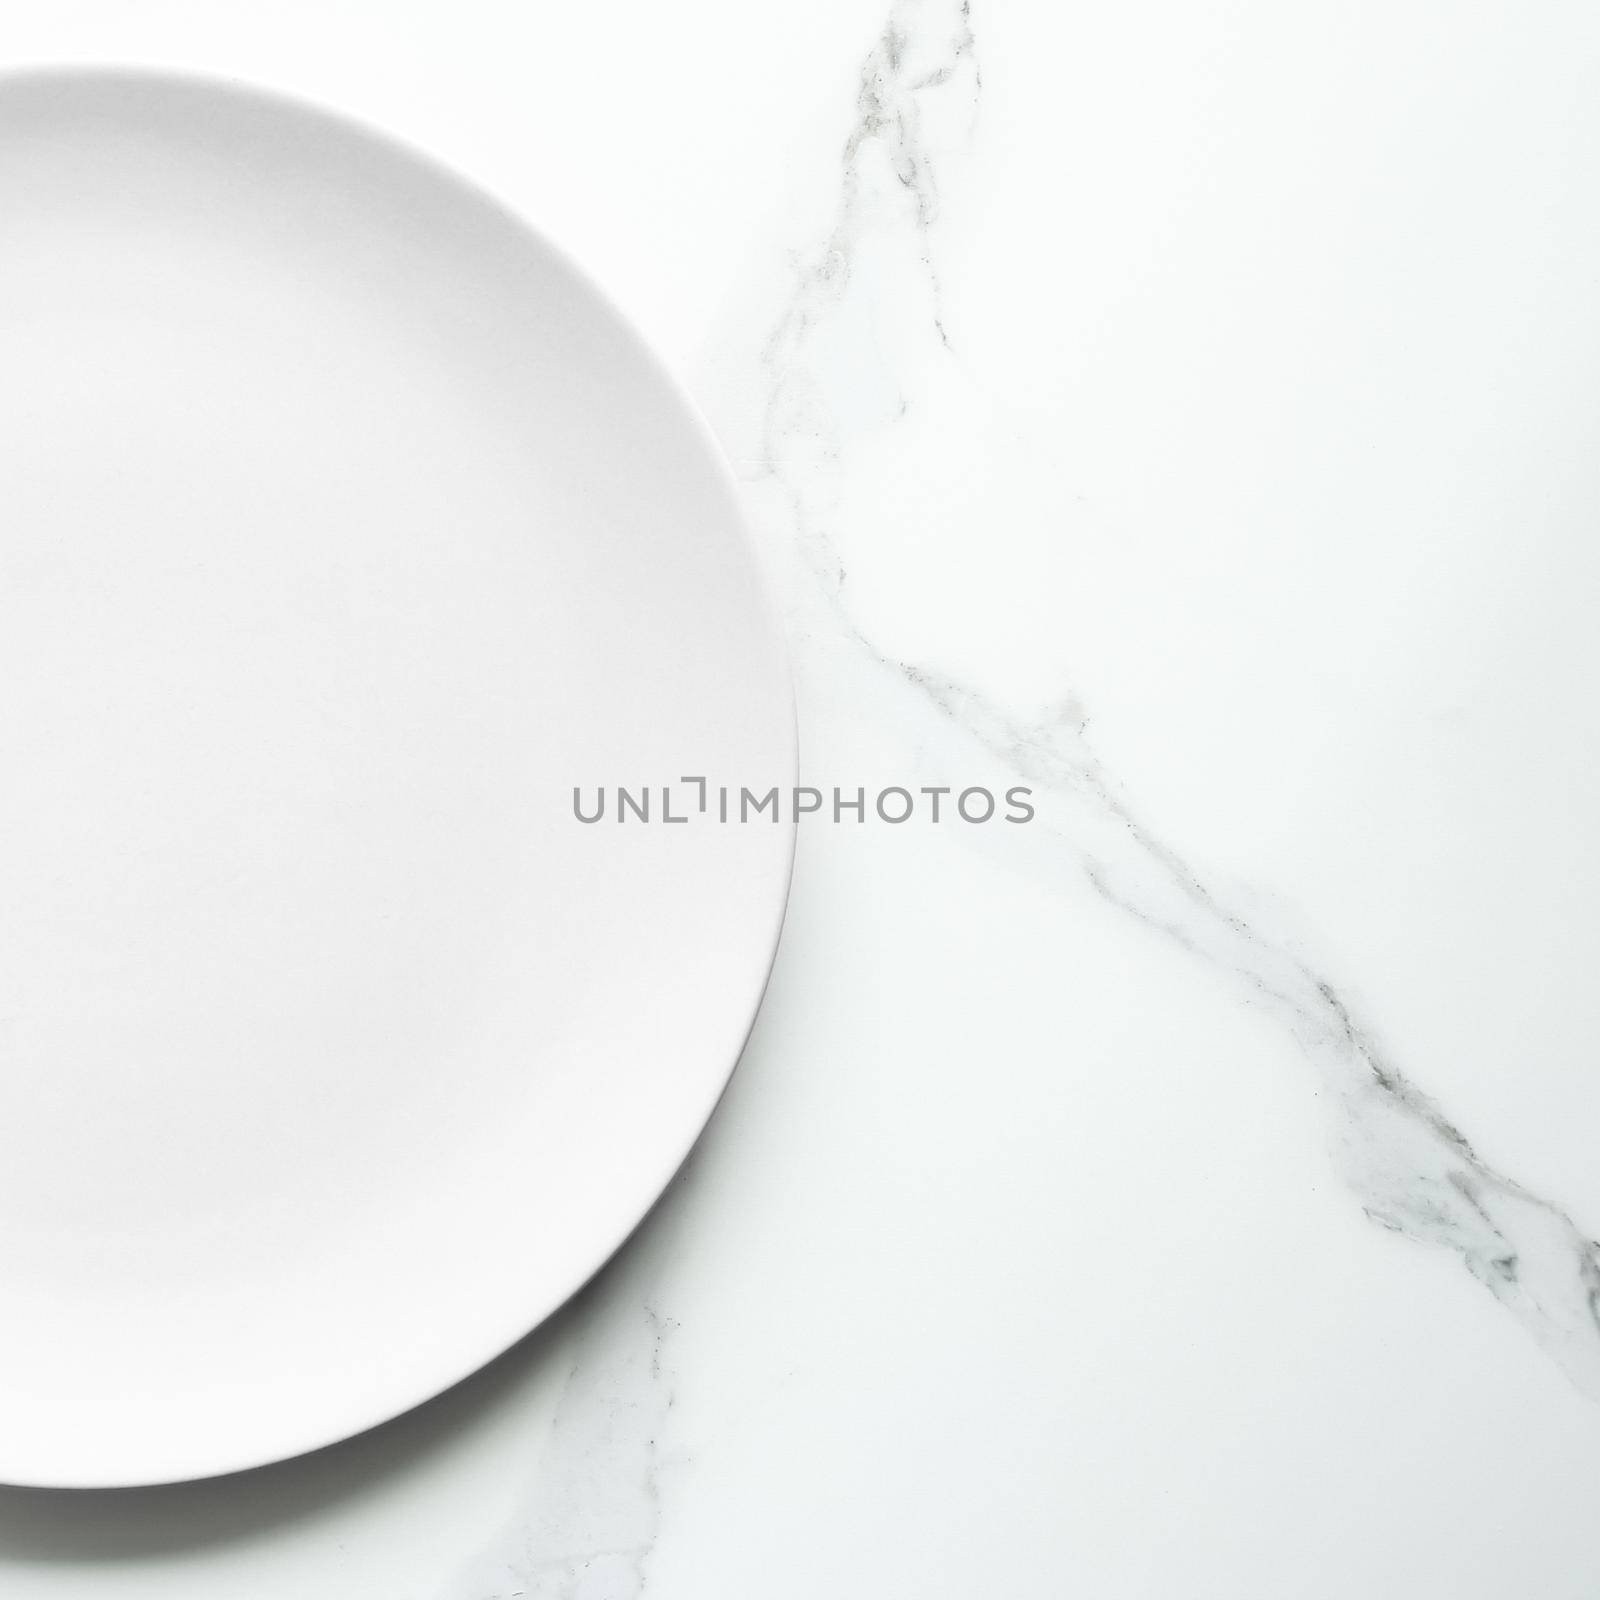 Serve the perfect plate by Anneleven